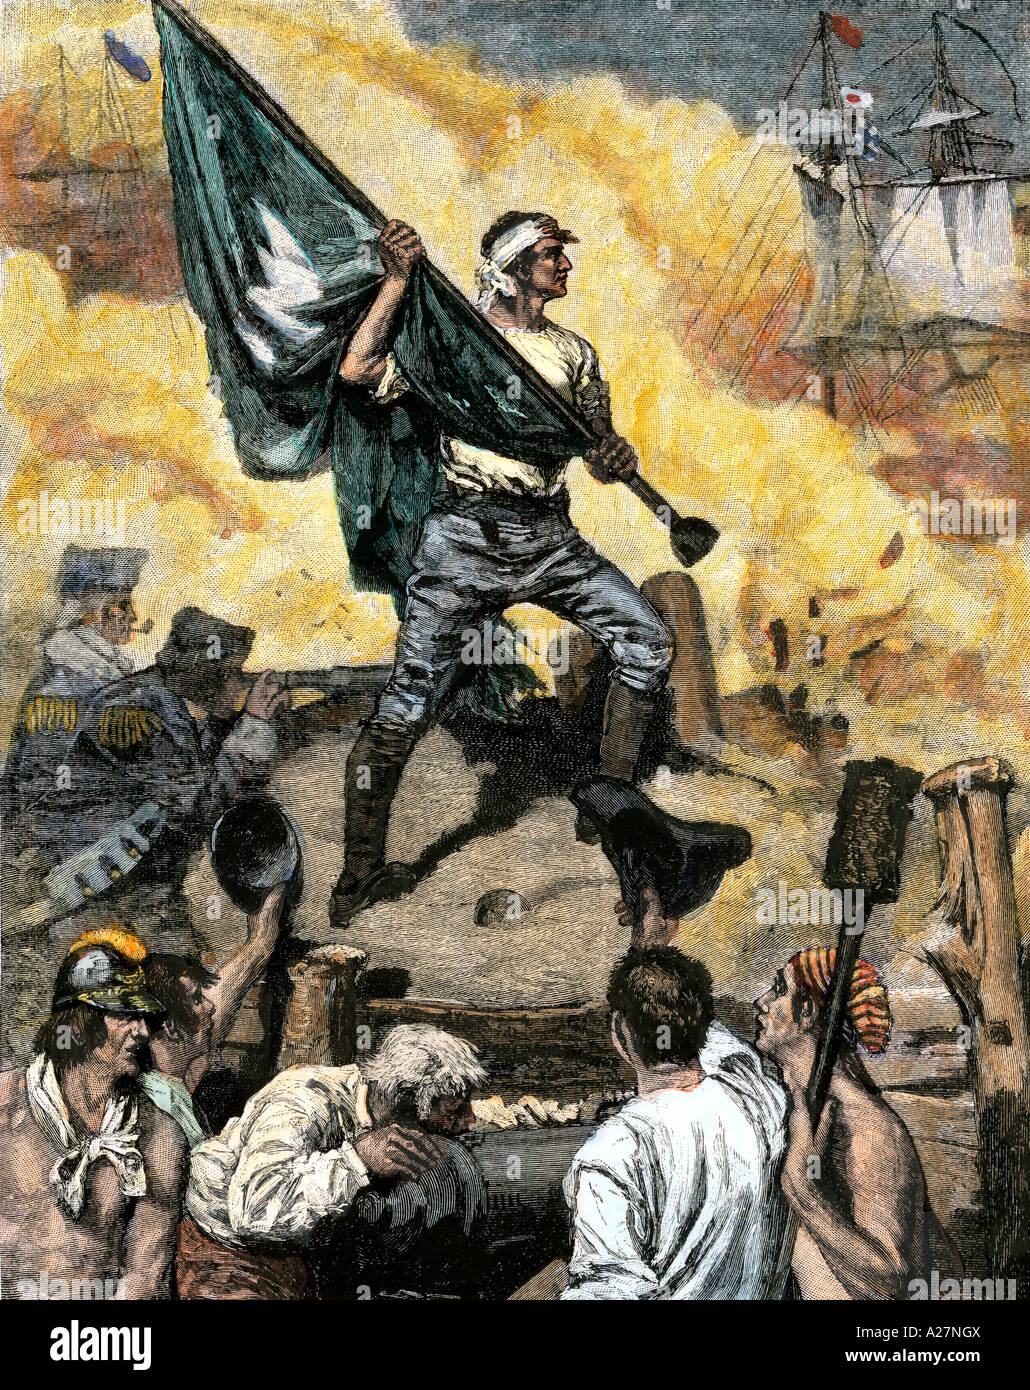 Sergeant William Jasper with the South Carolina flag at the Battle of Fort Moultrie American Revolution 1776. Hand-colored woodcut Stock Photo